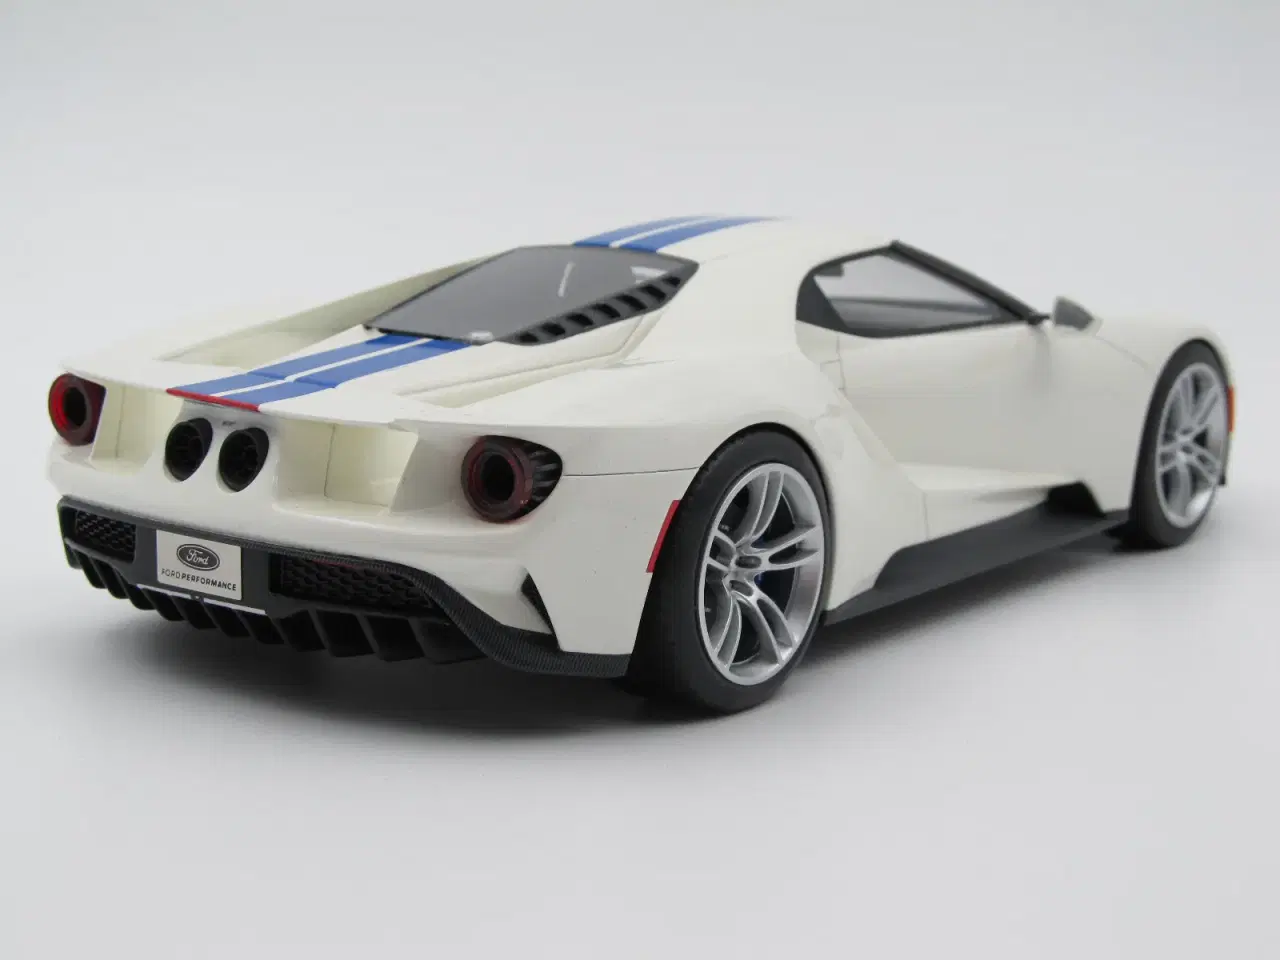 Billede 4 - 2016 Ford GT Shelby Limited Edition - 1:18